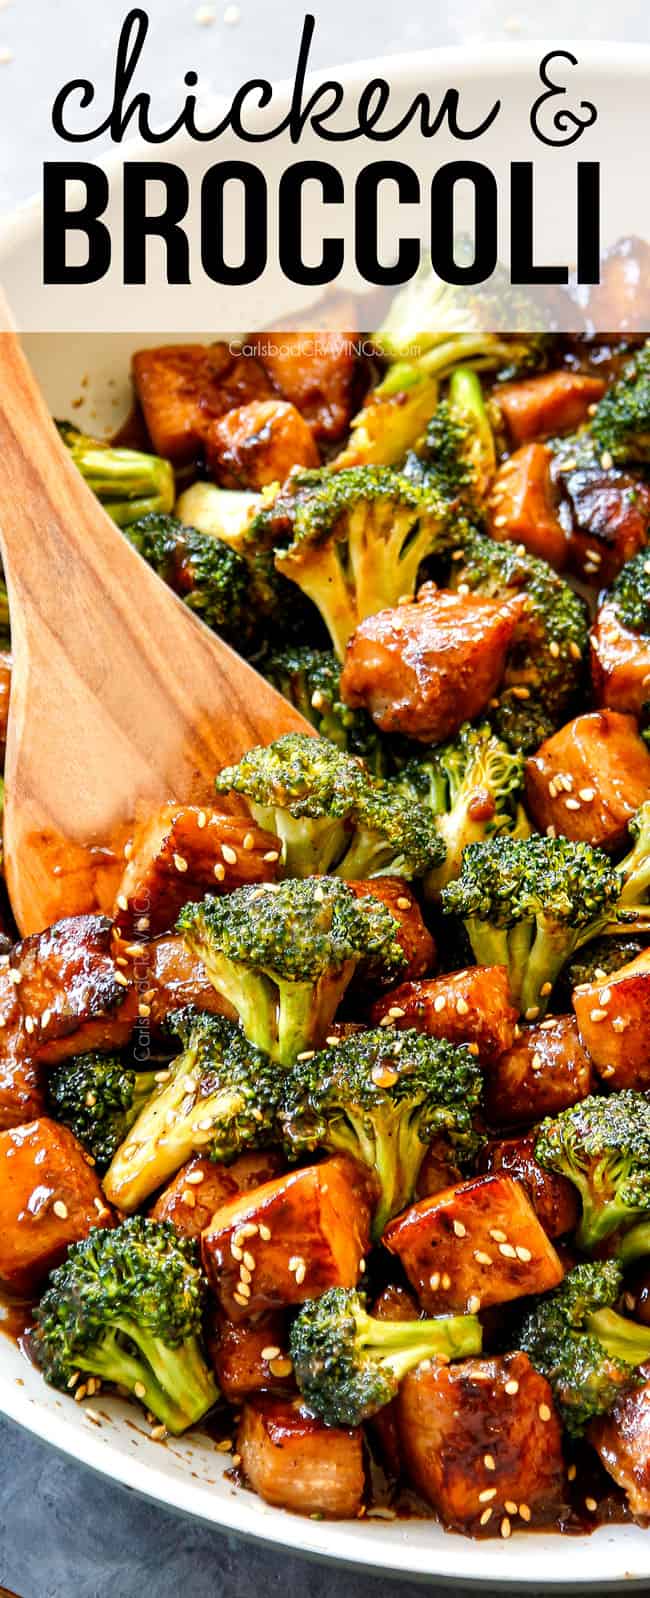 Best Chicken And Broccoli Stir Fry Make Ahead Freeezr Instructions